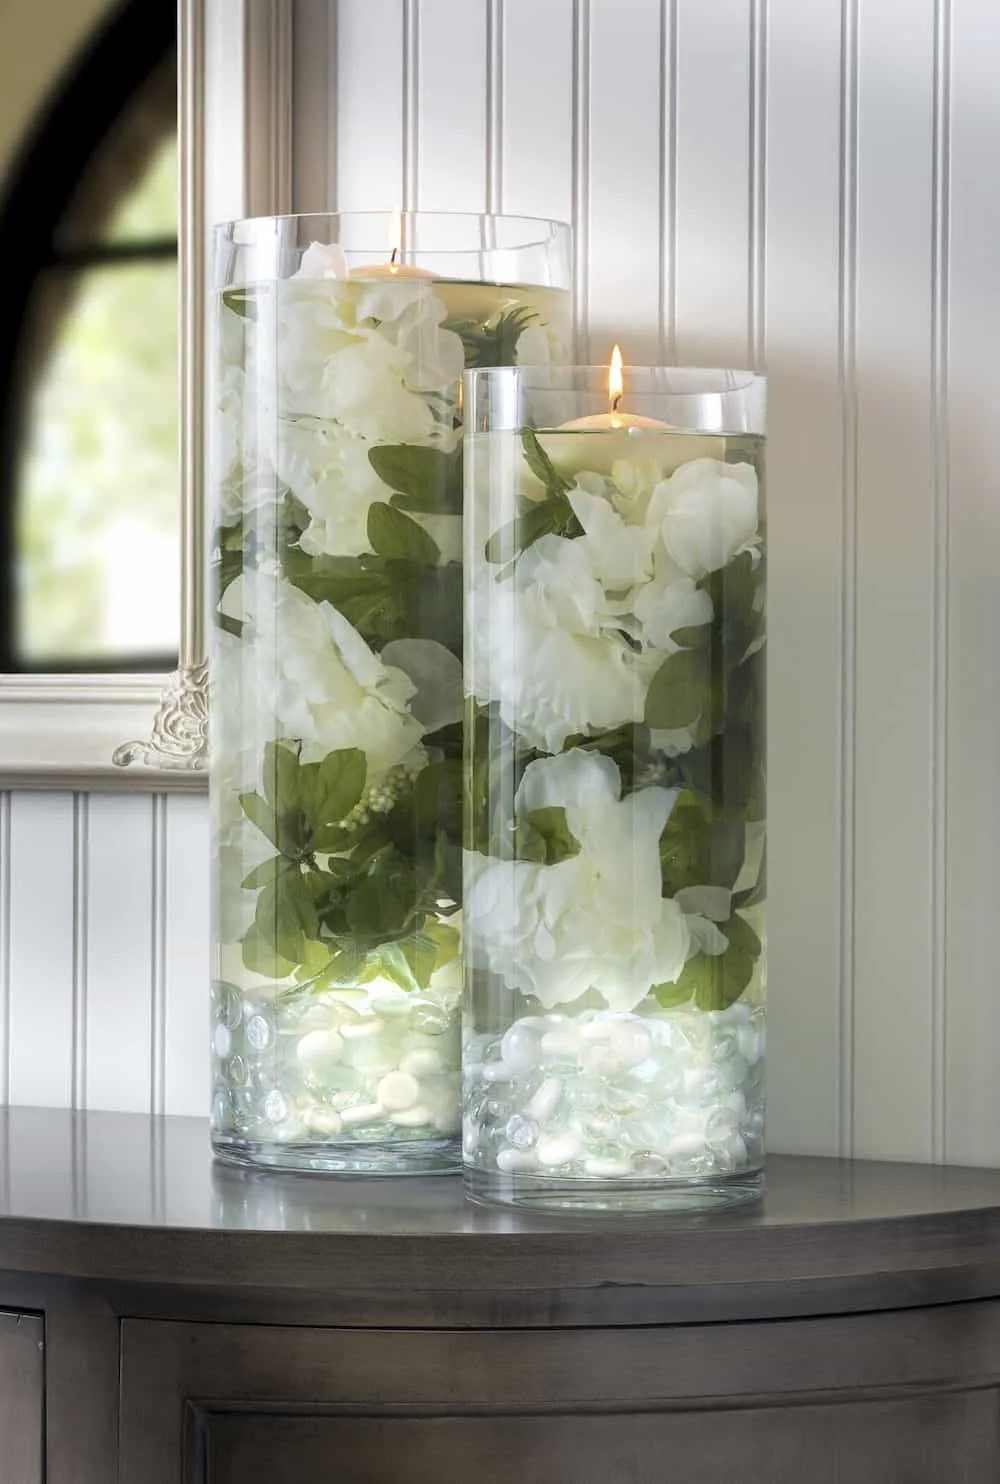 DIY wedding centerpieces with floating candles and LED lights